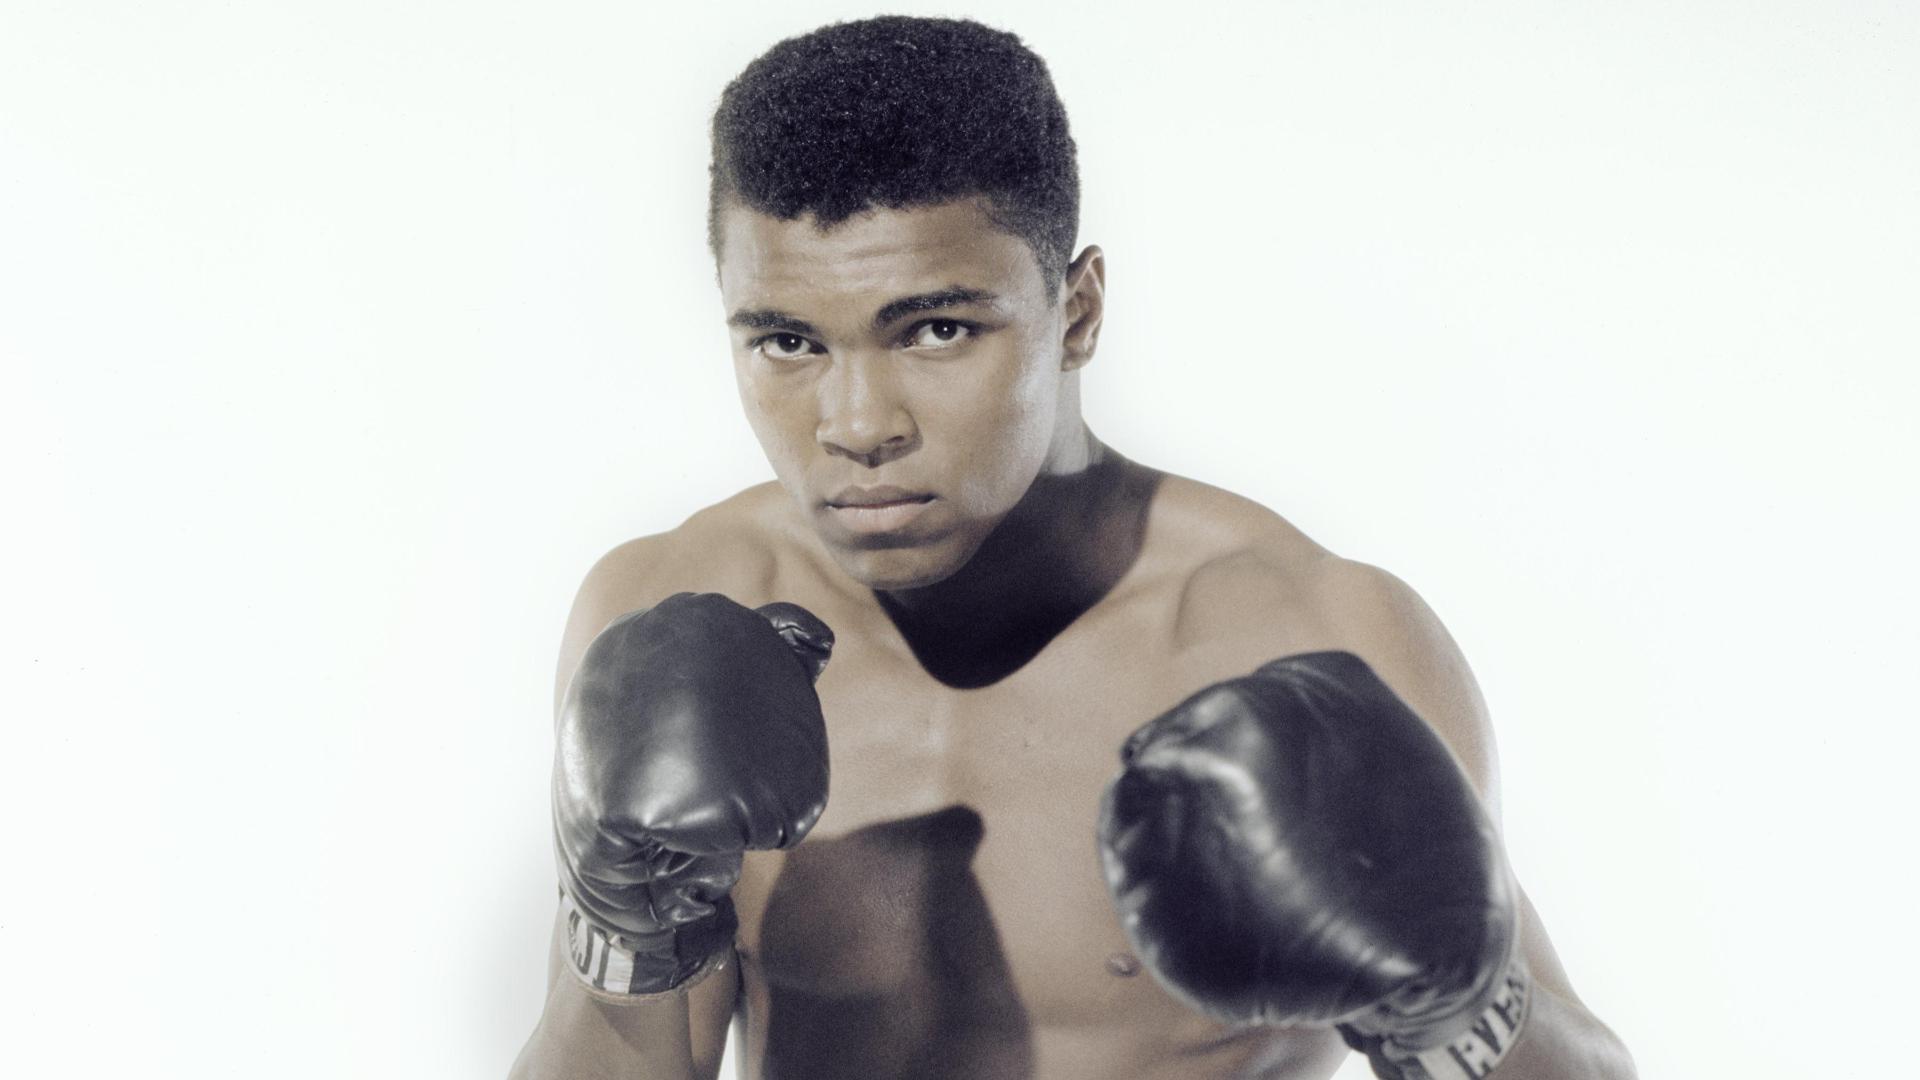 Muhammad Ali picture wearing boxing gloves